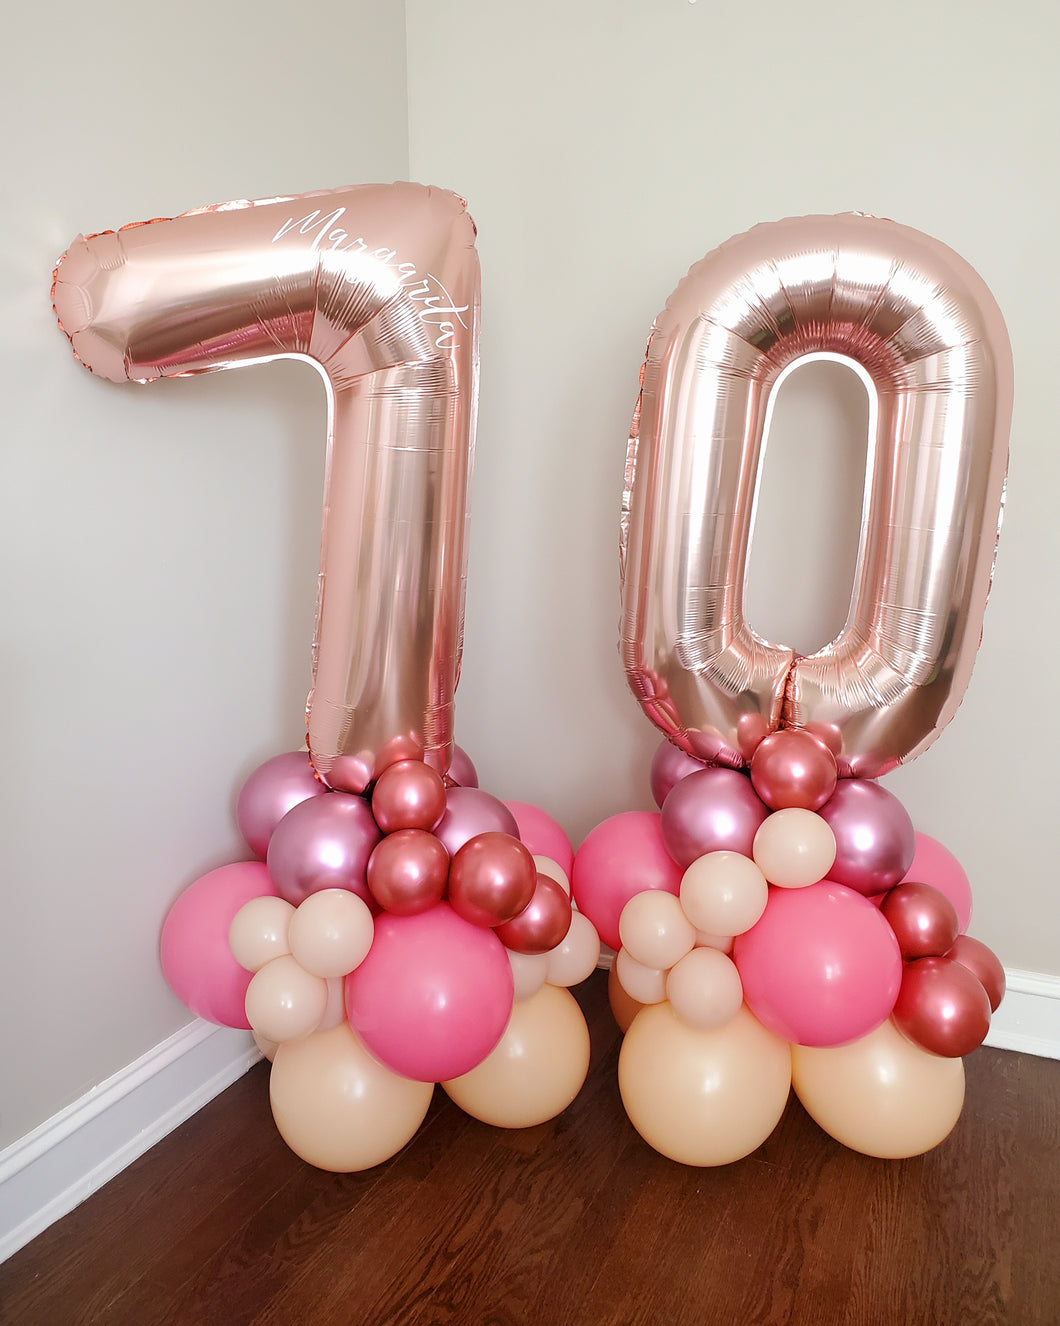 Double Number Balloon Columns